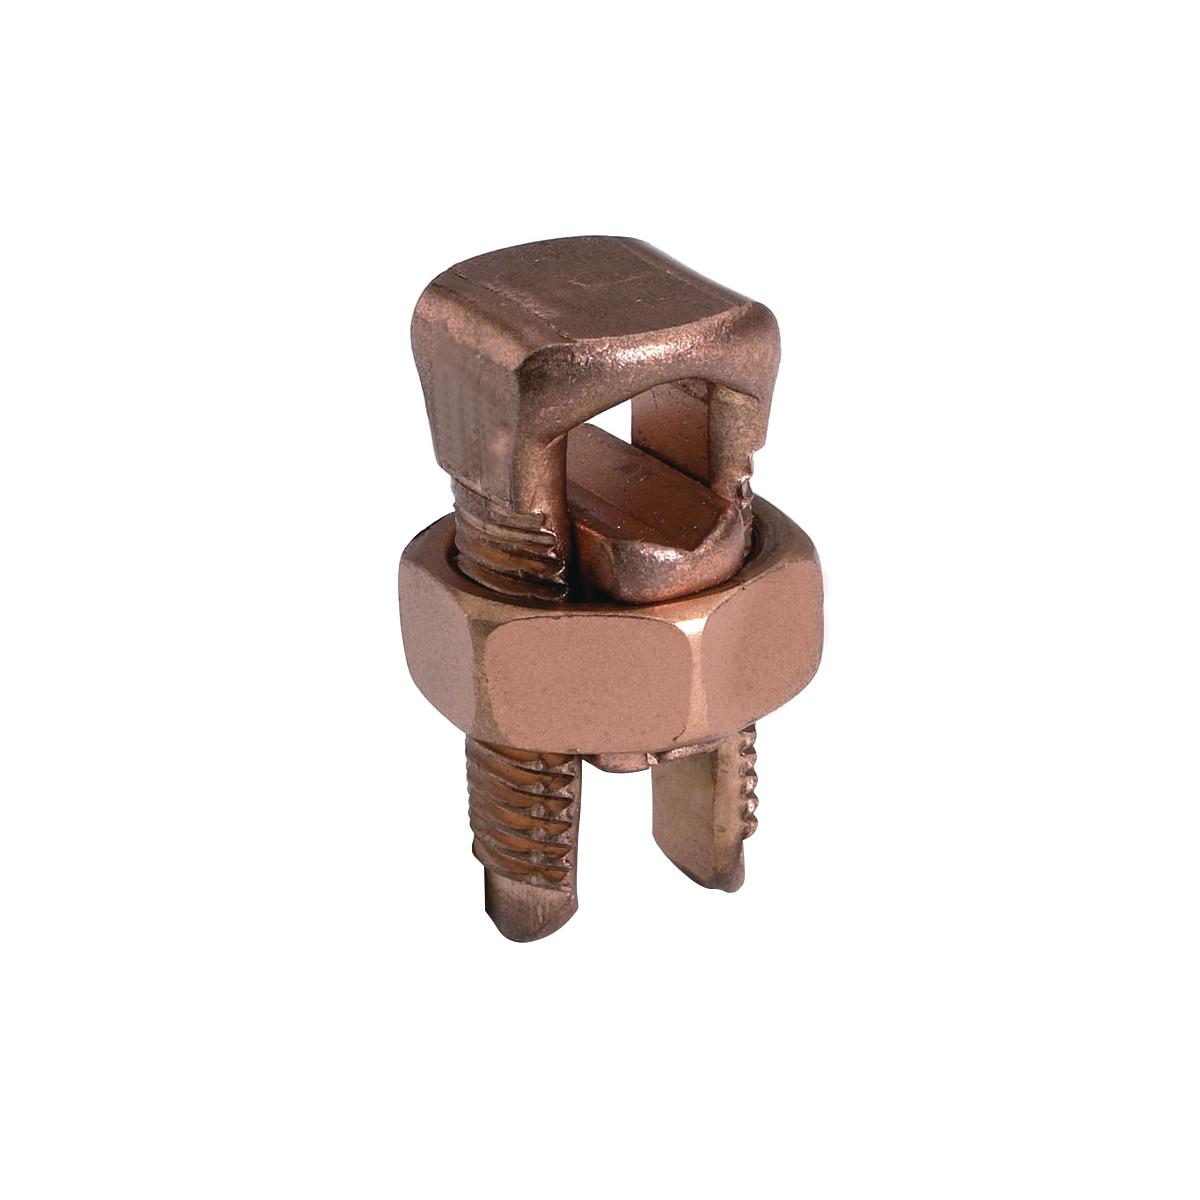 Hubbell KS17 Copper Split Bolt, Cu: 8 AWG (Str)-6 AWG (Sol) (Run & Tap),Length:1.14.  ; Features: UL467 Listed For Direct Burial Applications In Earth Or Concrete, Compact, High-Strength, High Copper Alloy SERVIT Split-Bolt Has Free-Running Threads And Easy To Grip Wr